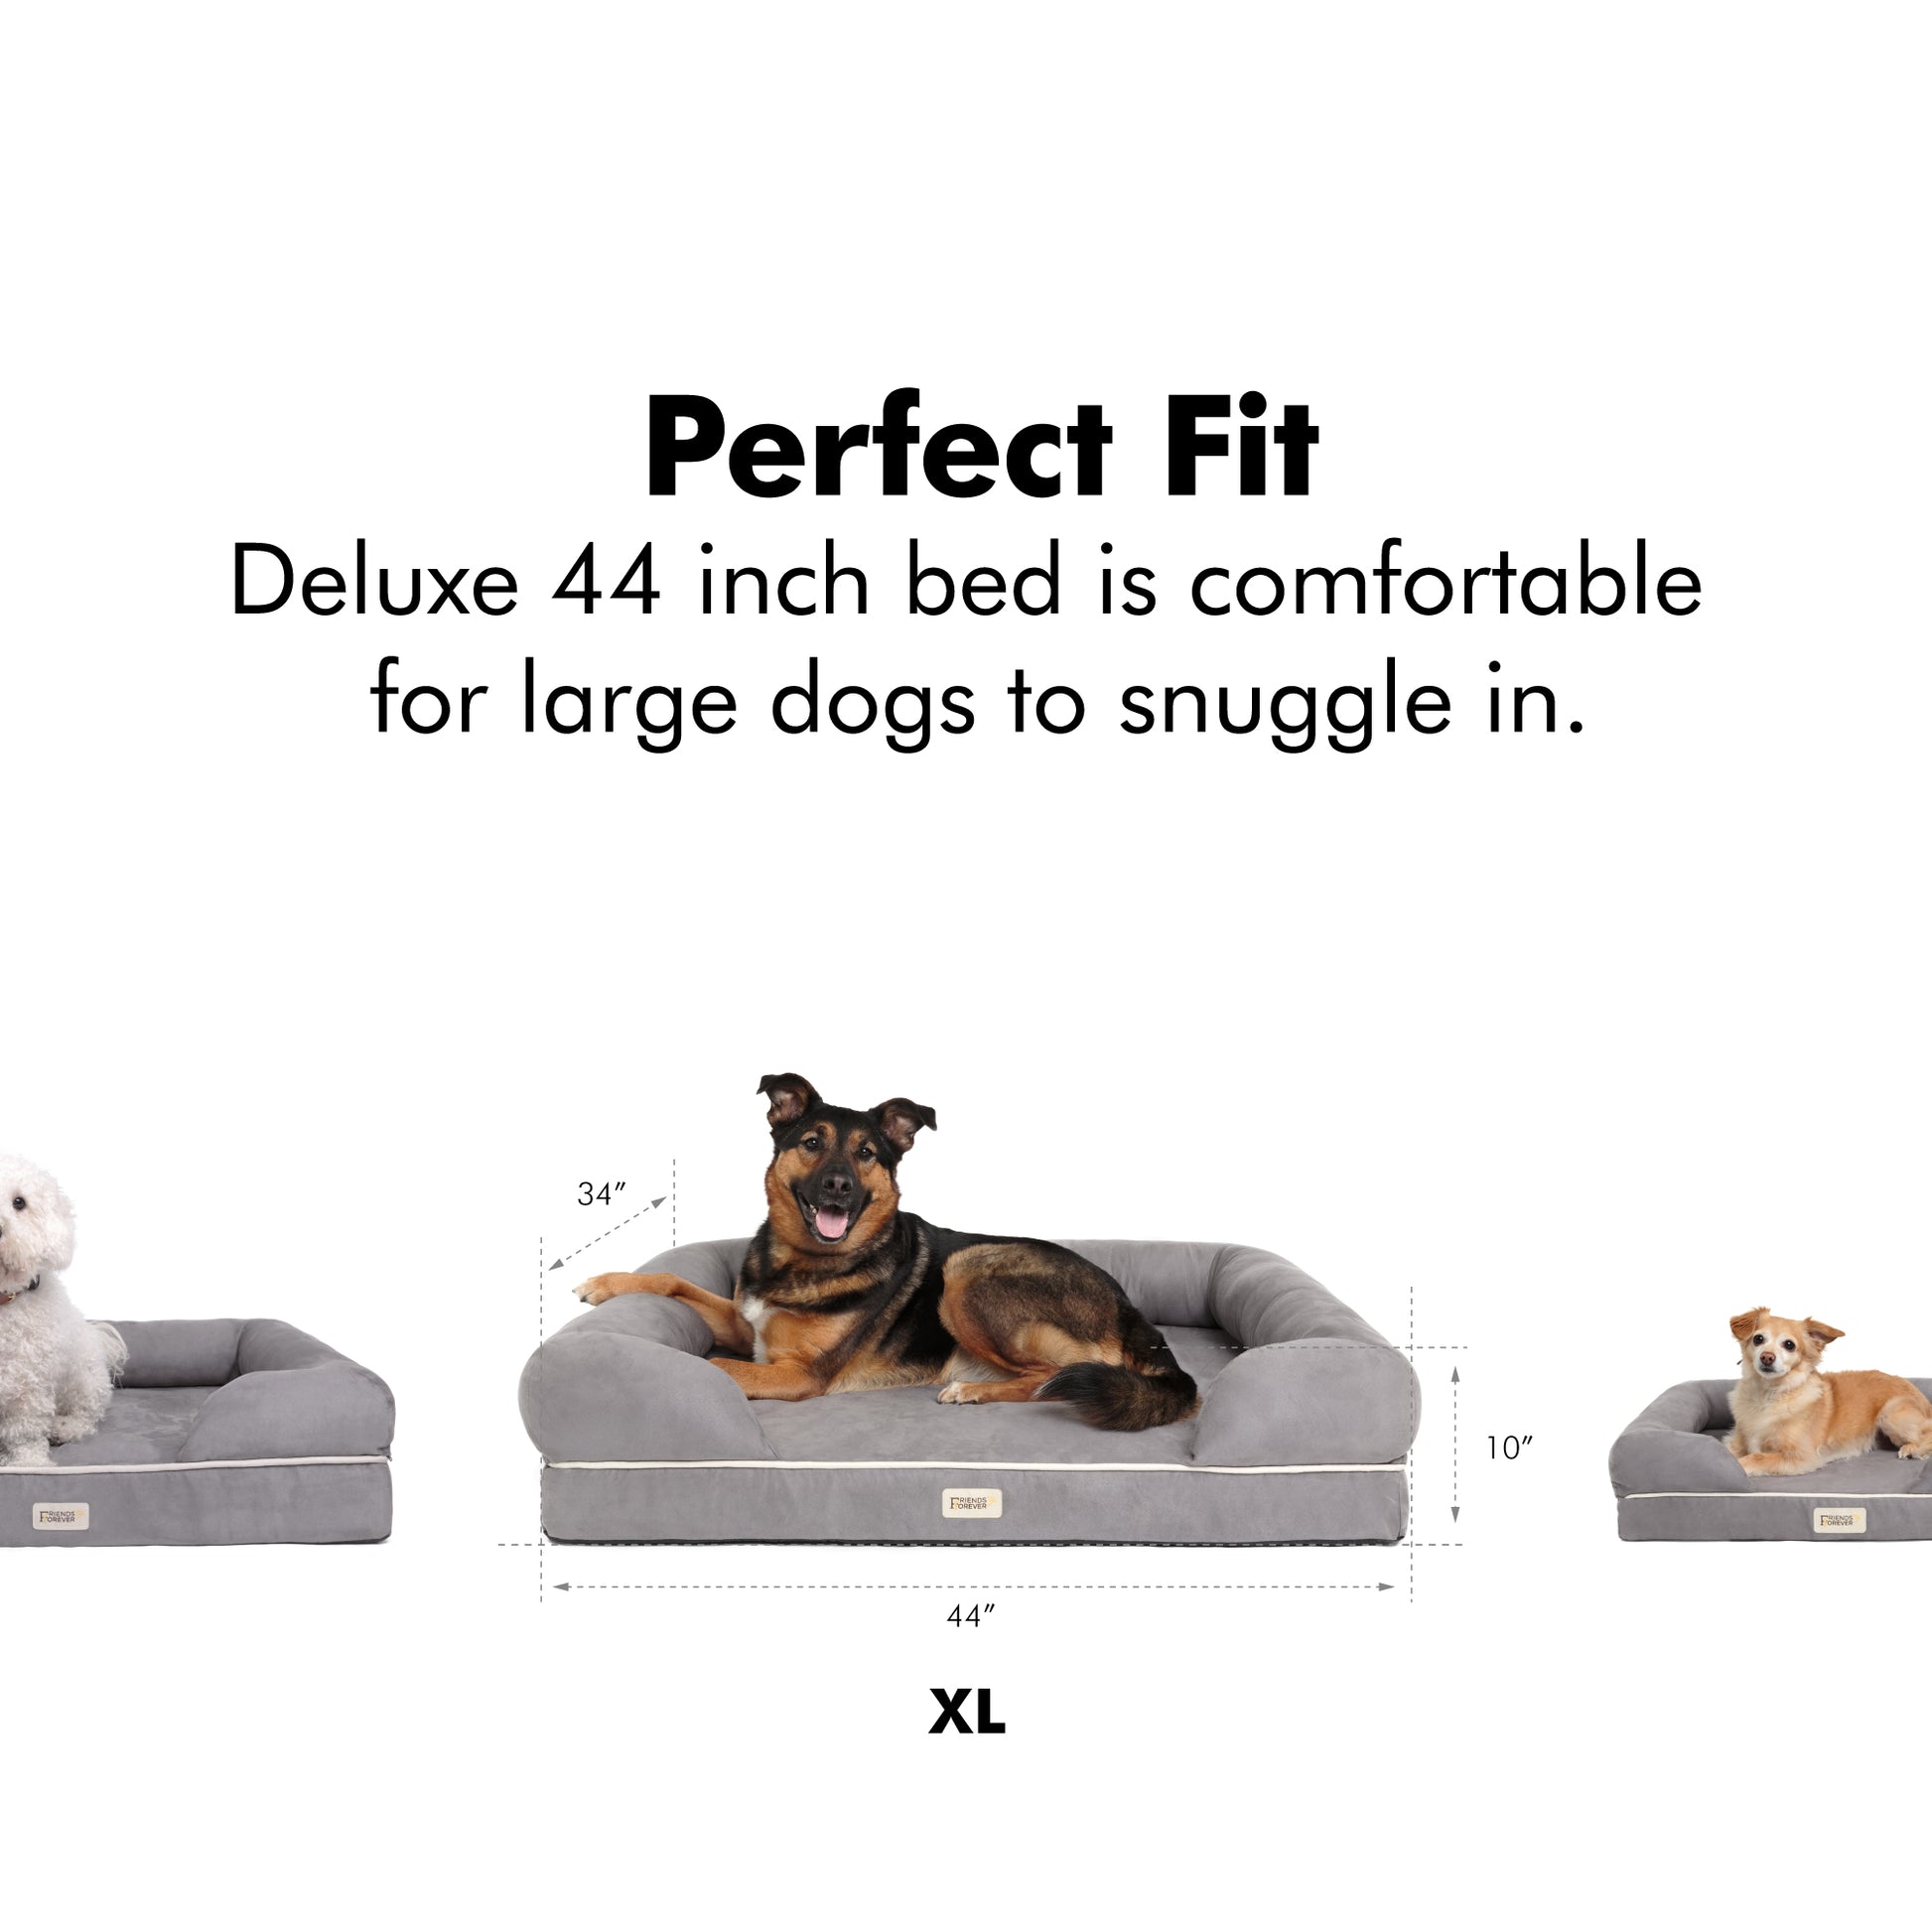 Orthopedic Dog Bed and Cat Bed | Dog Couch - Chester